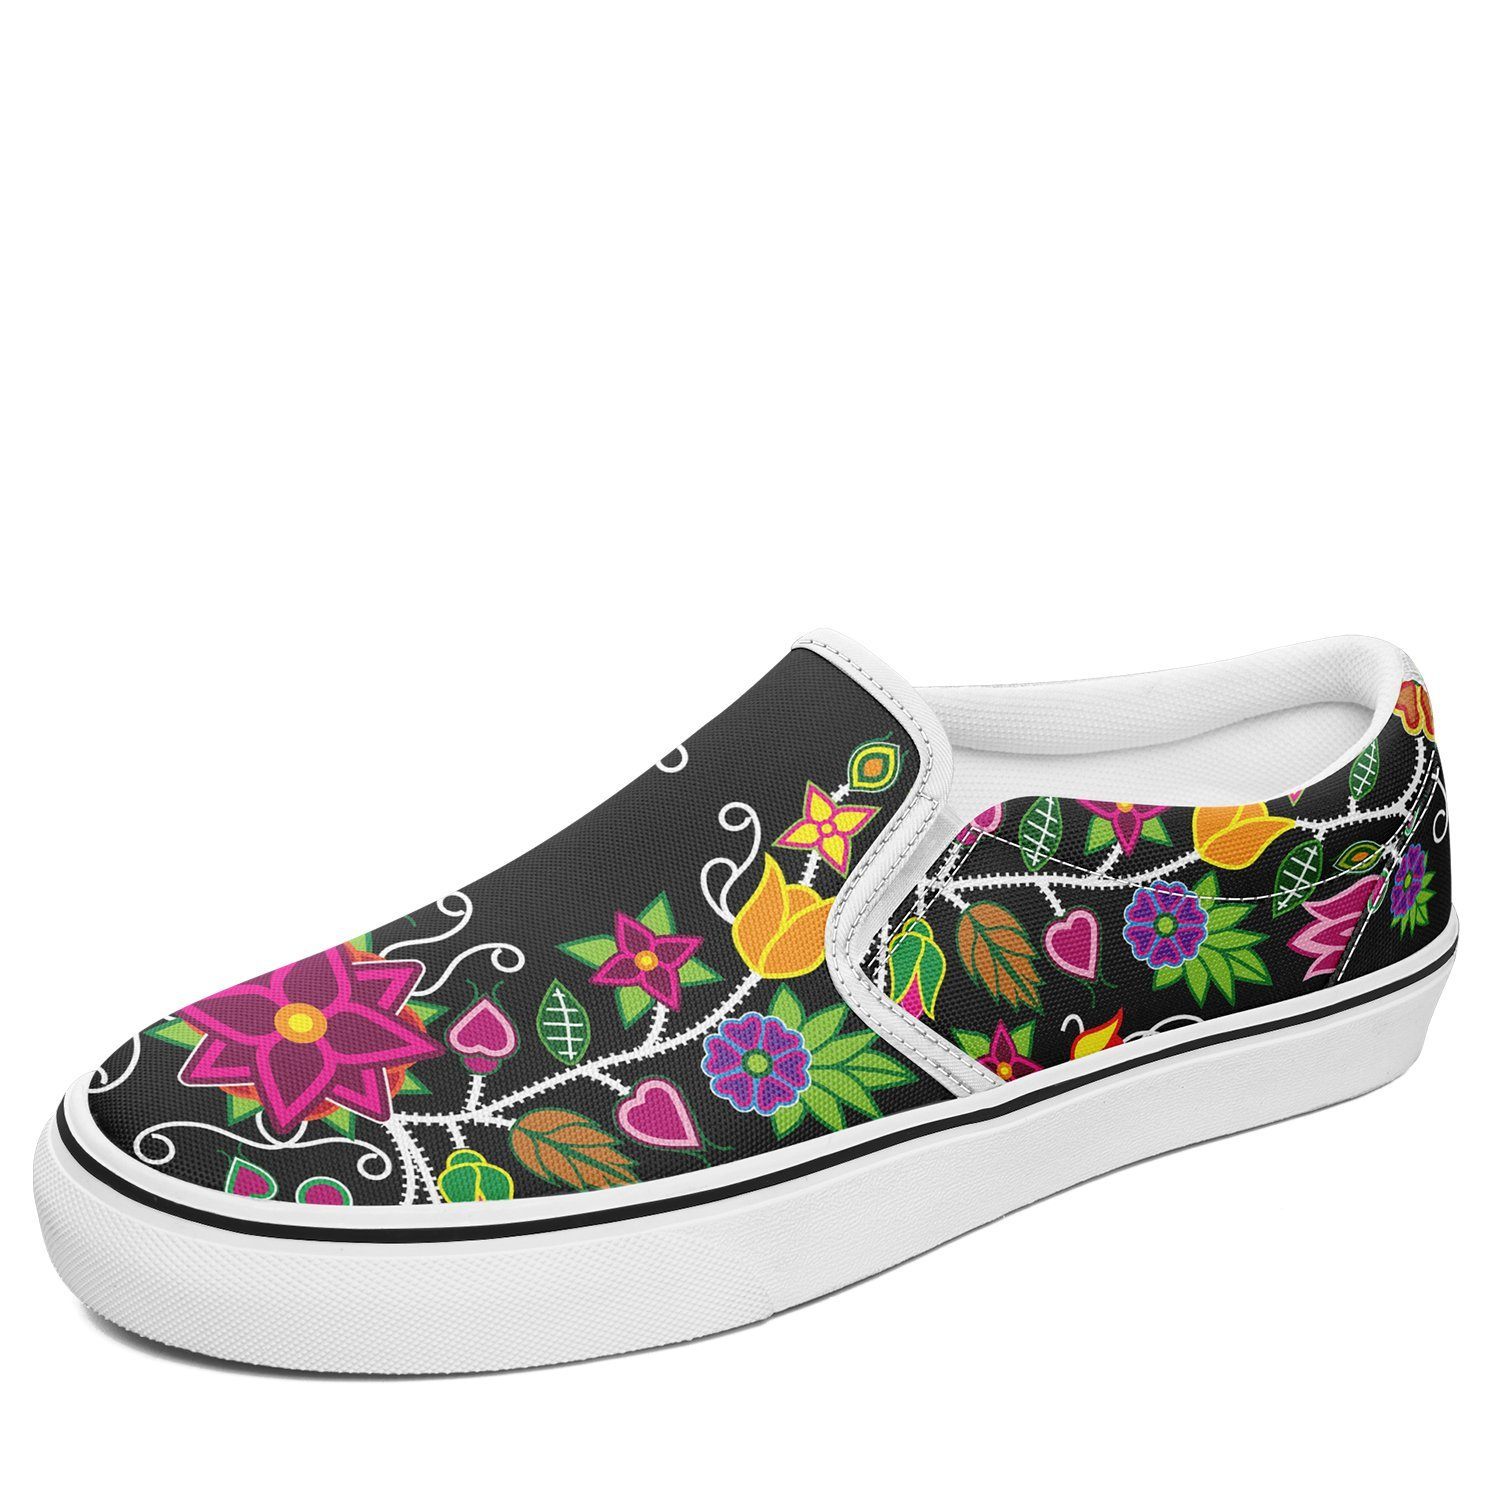 Floral Beadwork Otoyimm Kid's Canvas Slip On Shoes 49 Dzine US Youth 1 / EUR 32 White Sole 